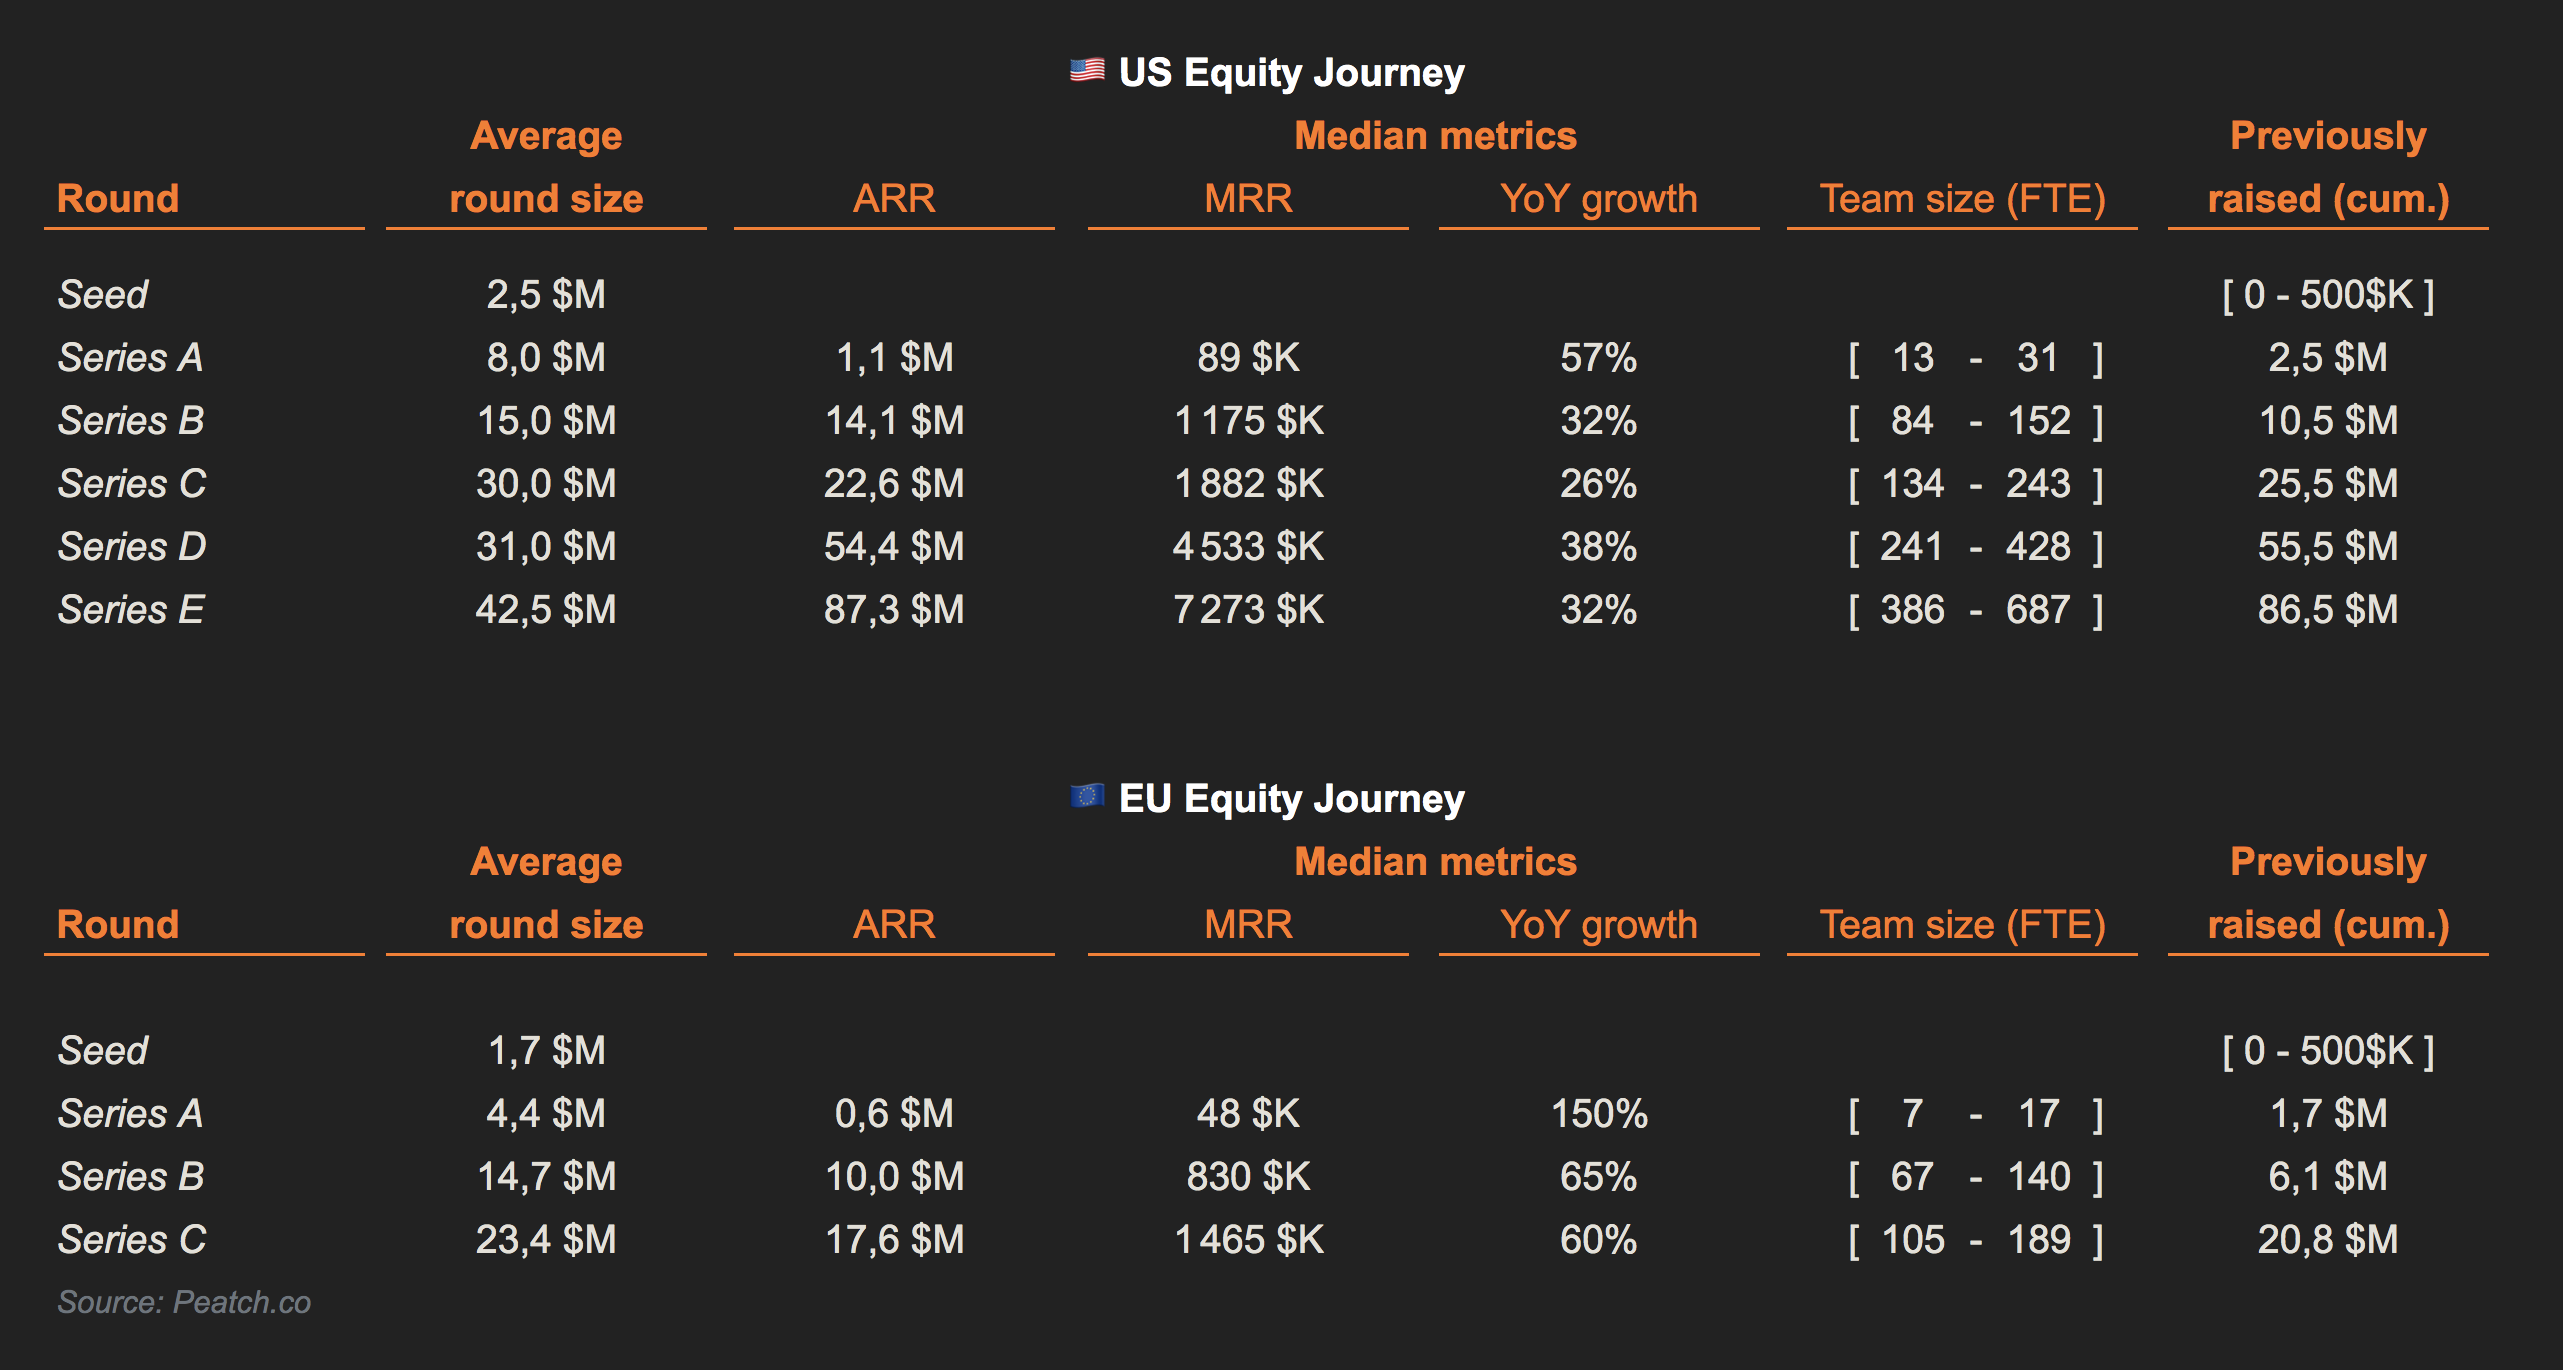 The Median Equity Journey